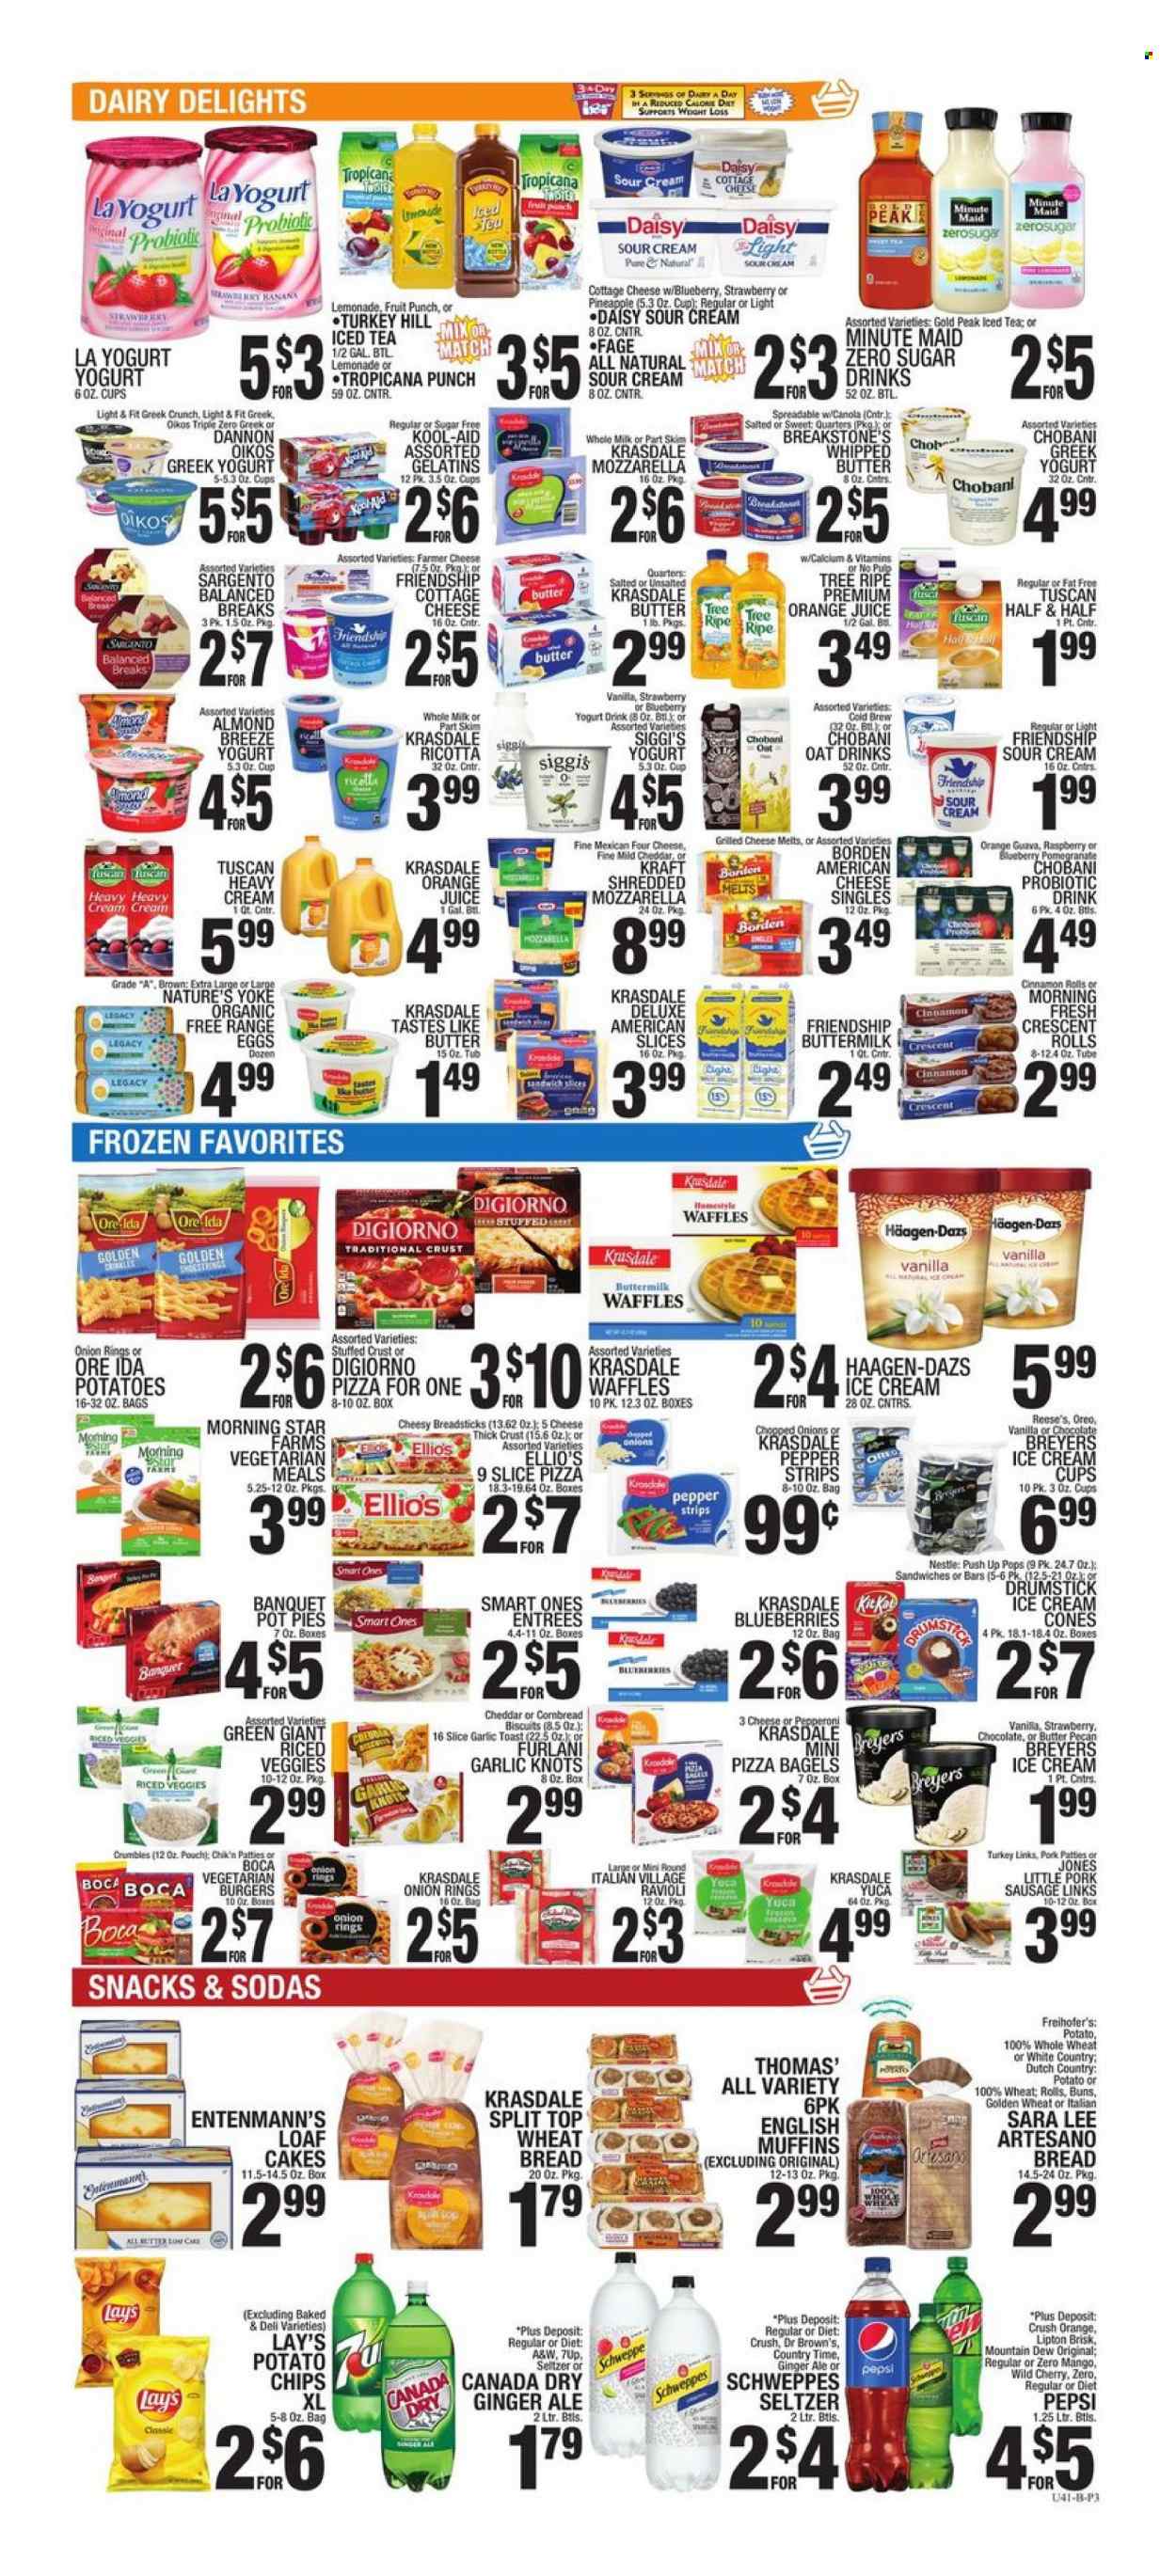 thumbnail - C-Town Flyer - 09/17/2021 - 09/23/2021 - Sales products - bagels, english muffins, wheat bread, cake, buns, Sara Lee, cinnamon roll, crescent rolls, pot pie, waffles, Entenmann's, potatoes, blueberries, guava, cherries, ravioli, pizza, onion rings, sandwich, hamburger, veggie burger, Kraft®, sausage, pork sausage, american cheese, cottage cheese, farmer cheese, mild cheddar, ricotta, Sargento, greek yoghurt, Oreo, yoghurt, Oikos, Chobani, Dannon, buttermilk, yoghurt drink, Almond Breeze, eggs, Tastes Like Butter, whipped butter, sour cream, ice cream, Reese's, Häagen-Dazs, strips, Ore-Ida, Nestlé, snack, bread sticks, Lay’s, oats, Canada Dry, ginger ale, lemonade, Mountain Dew, Schweppes, Pepsi, orange juice, juice, Lipton, ice tea, 7UP, A&W, Country Time, fruit punch, seltzer water, Half and half. Page 3.